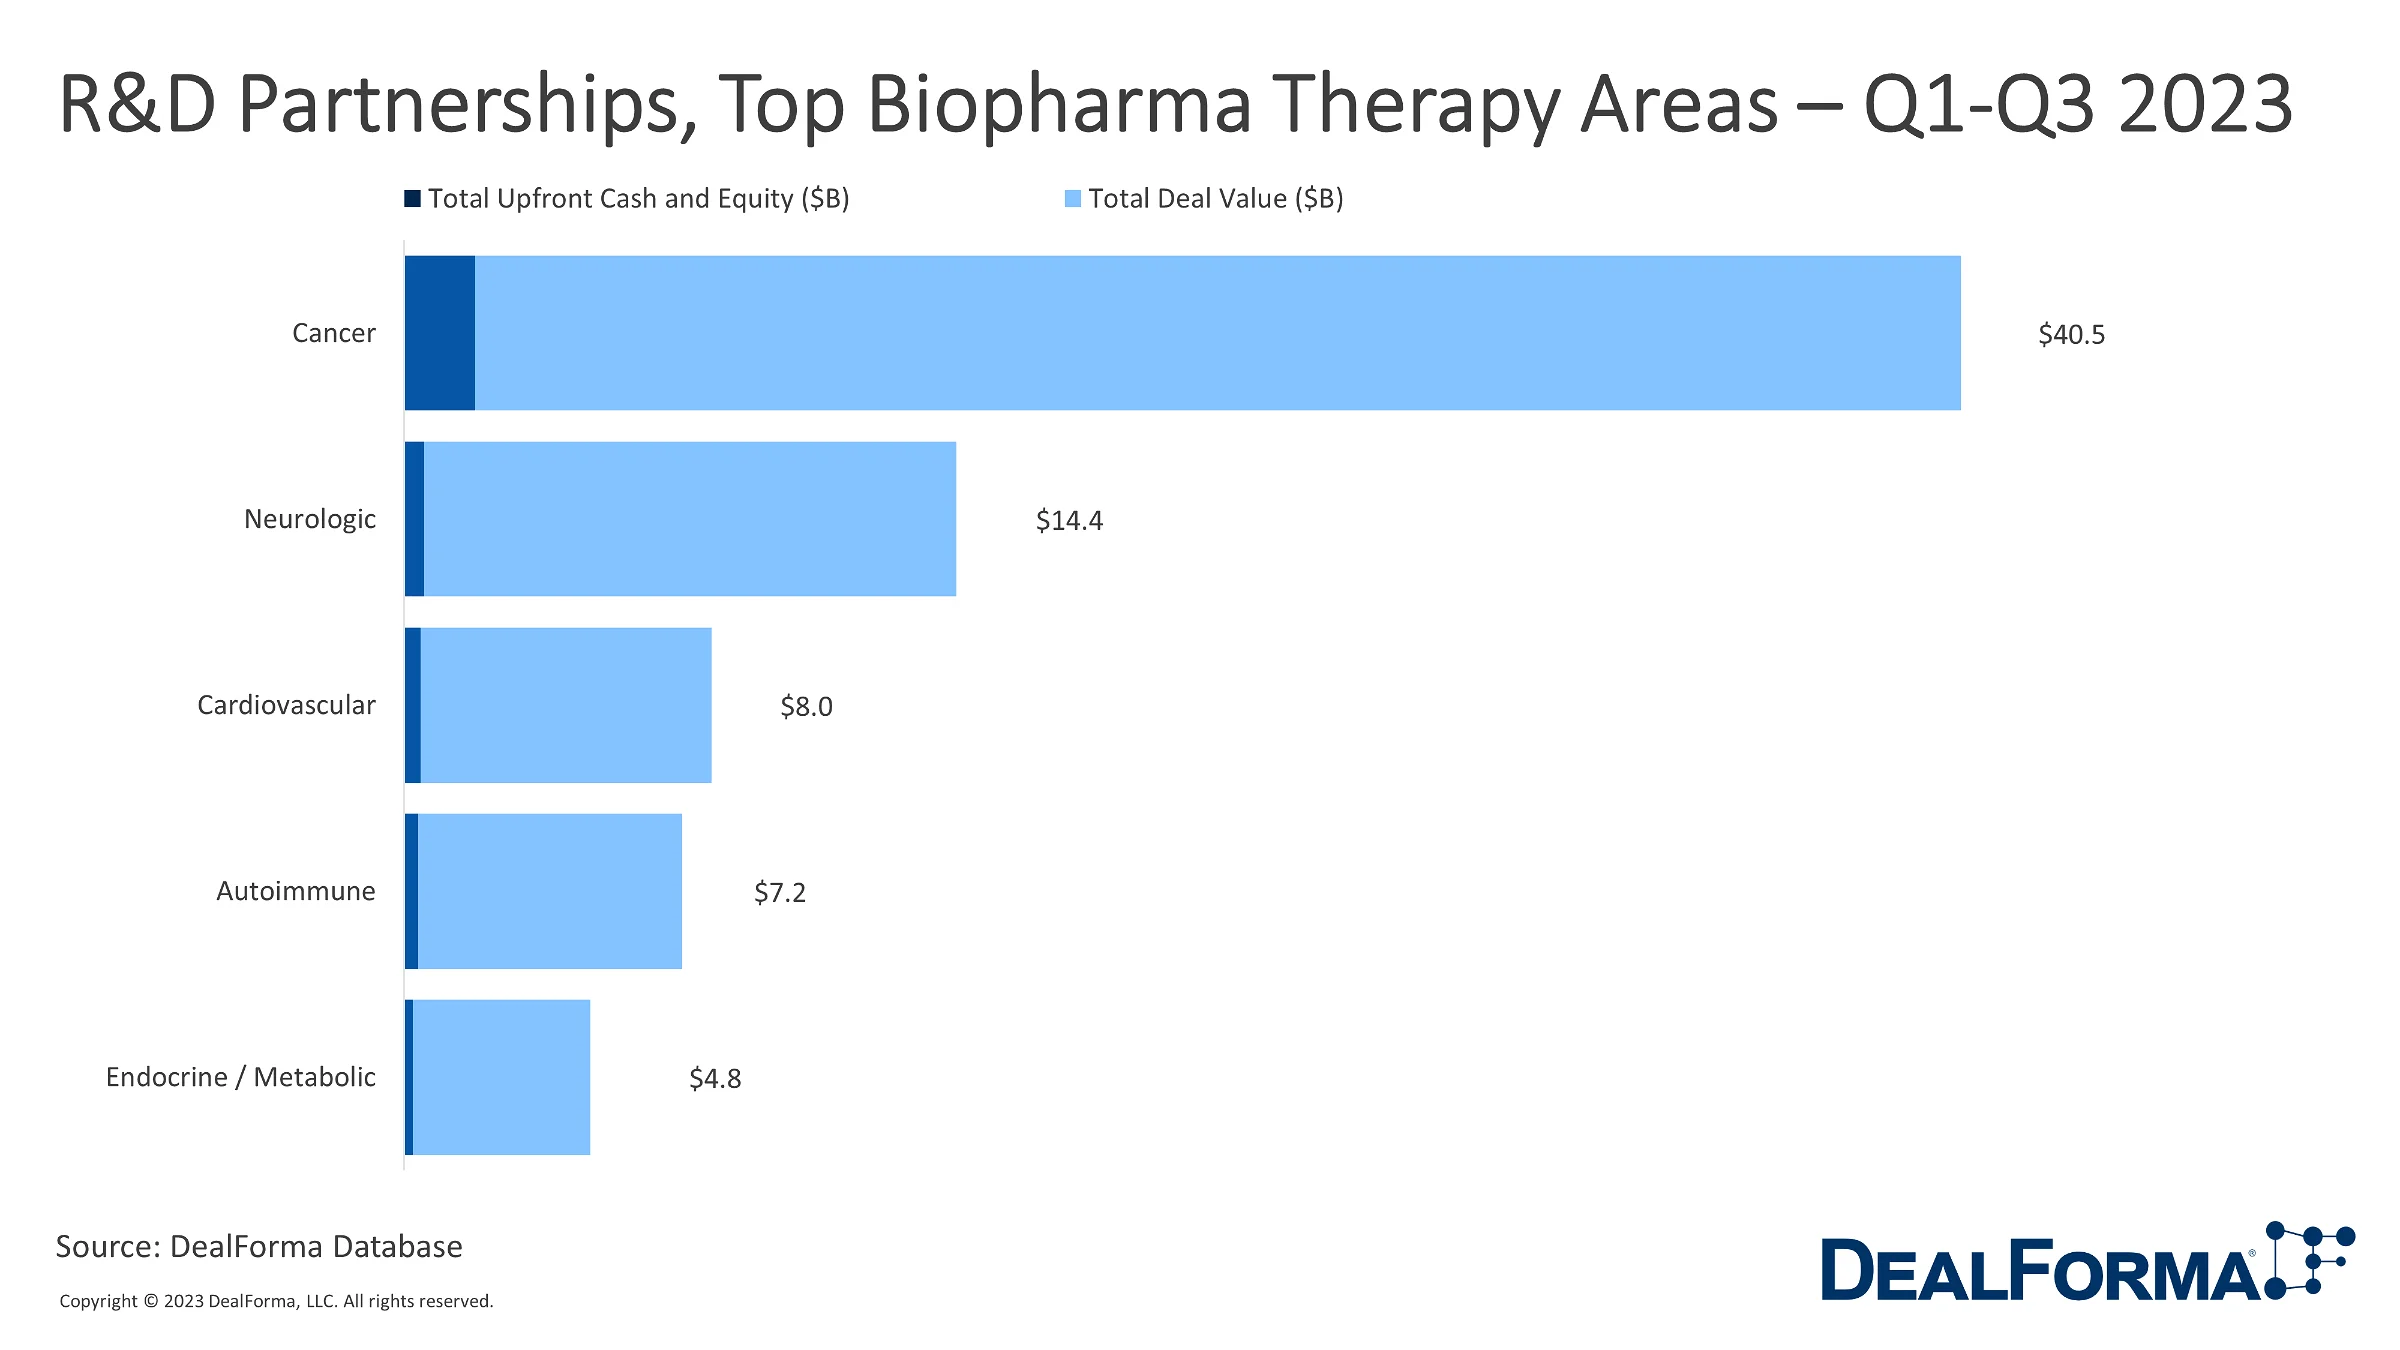 RD Partnerships For The Top Biopharma Therapy Areas Through Q3 2023